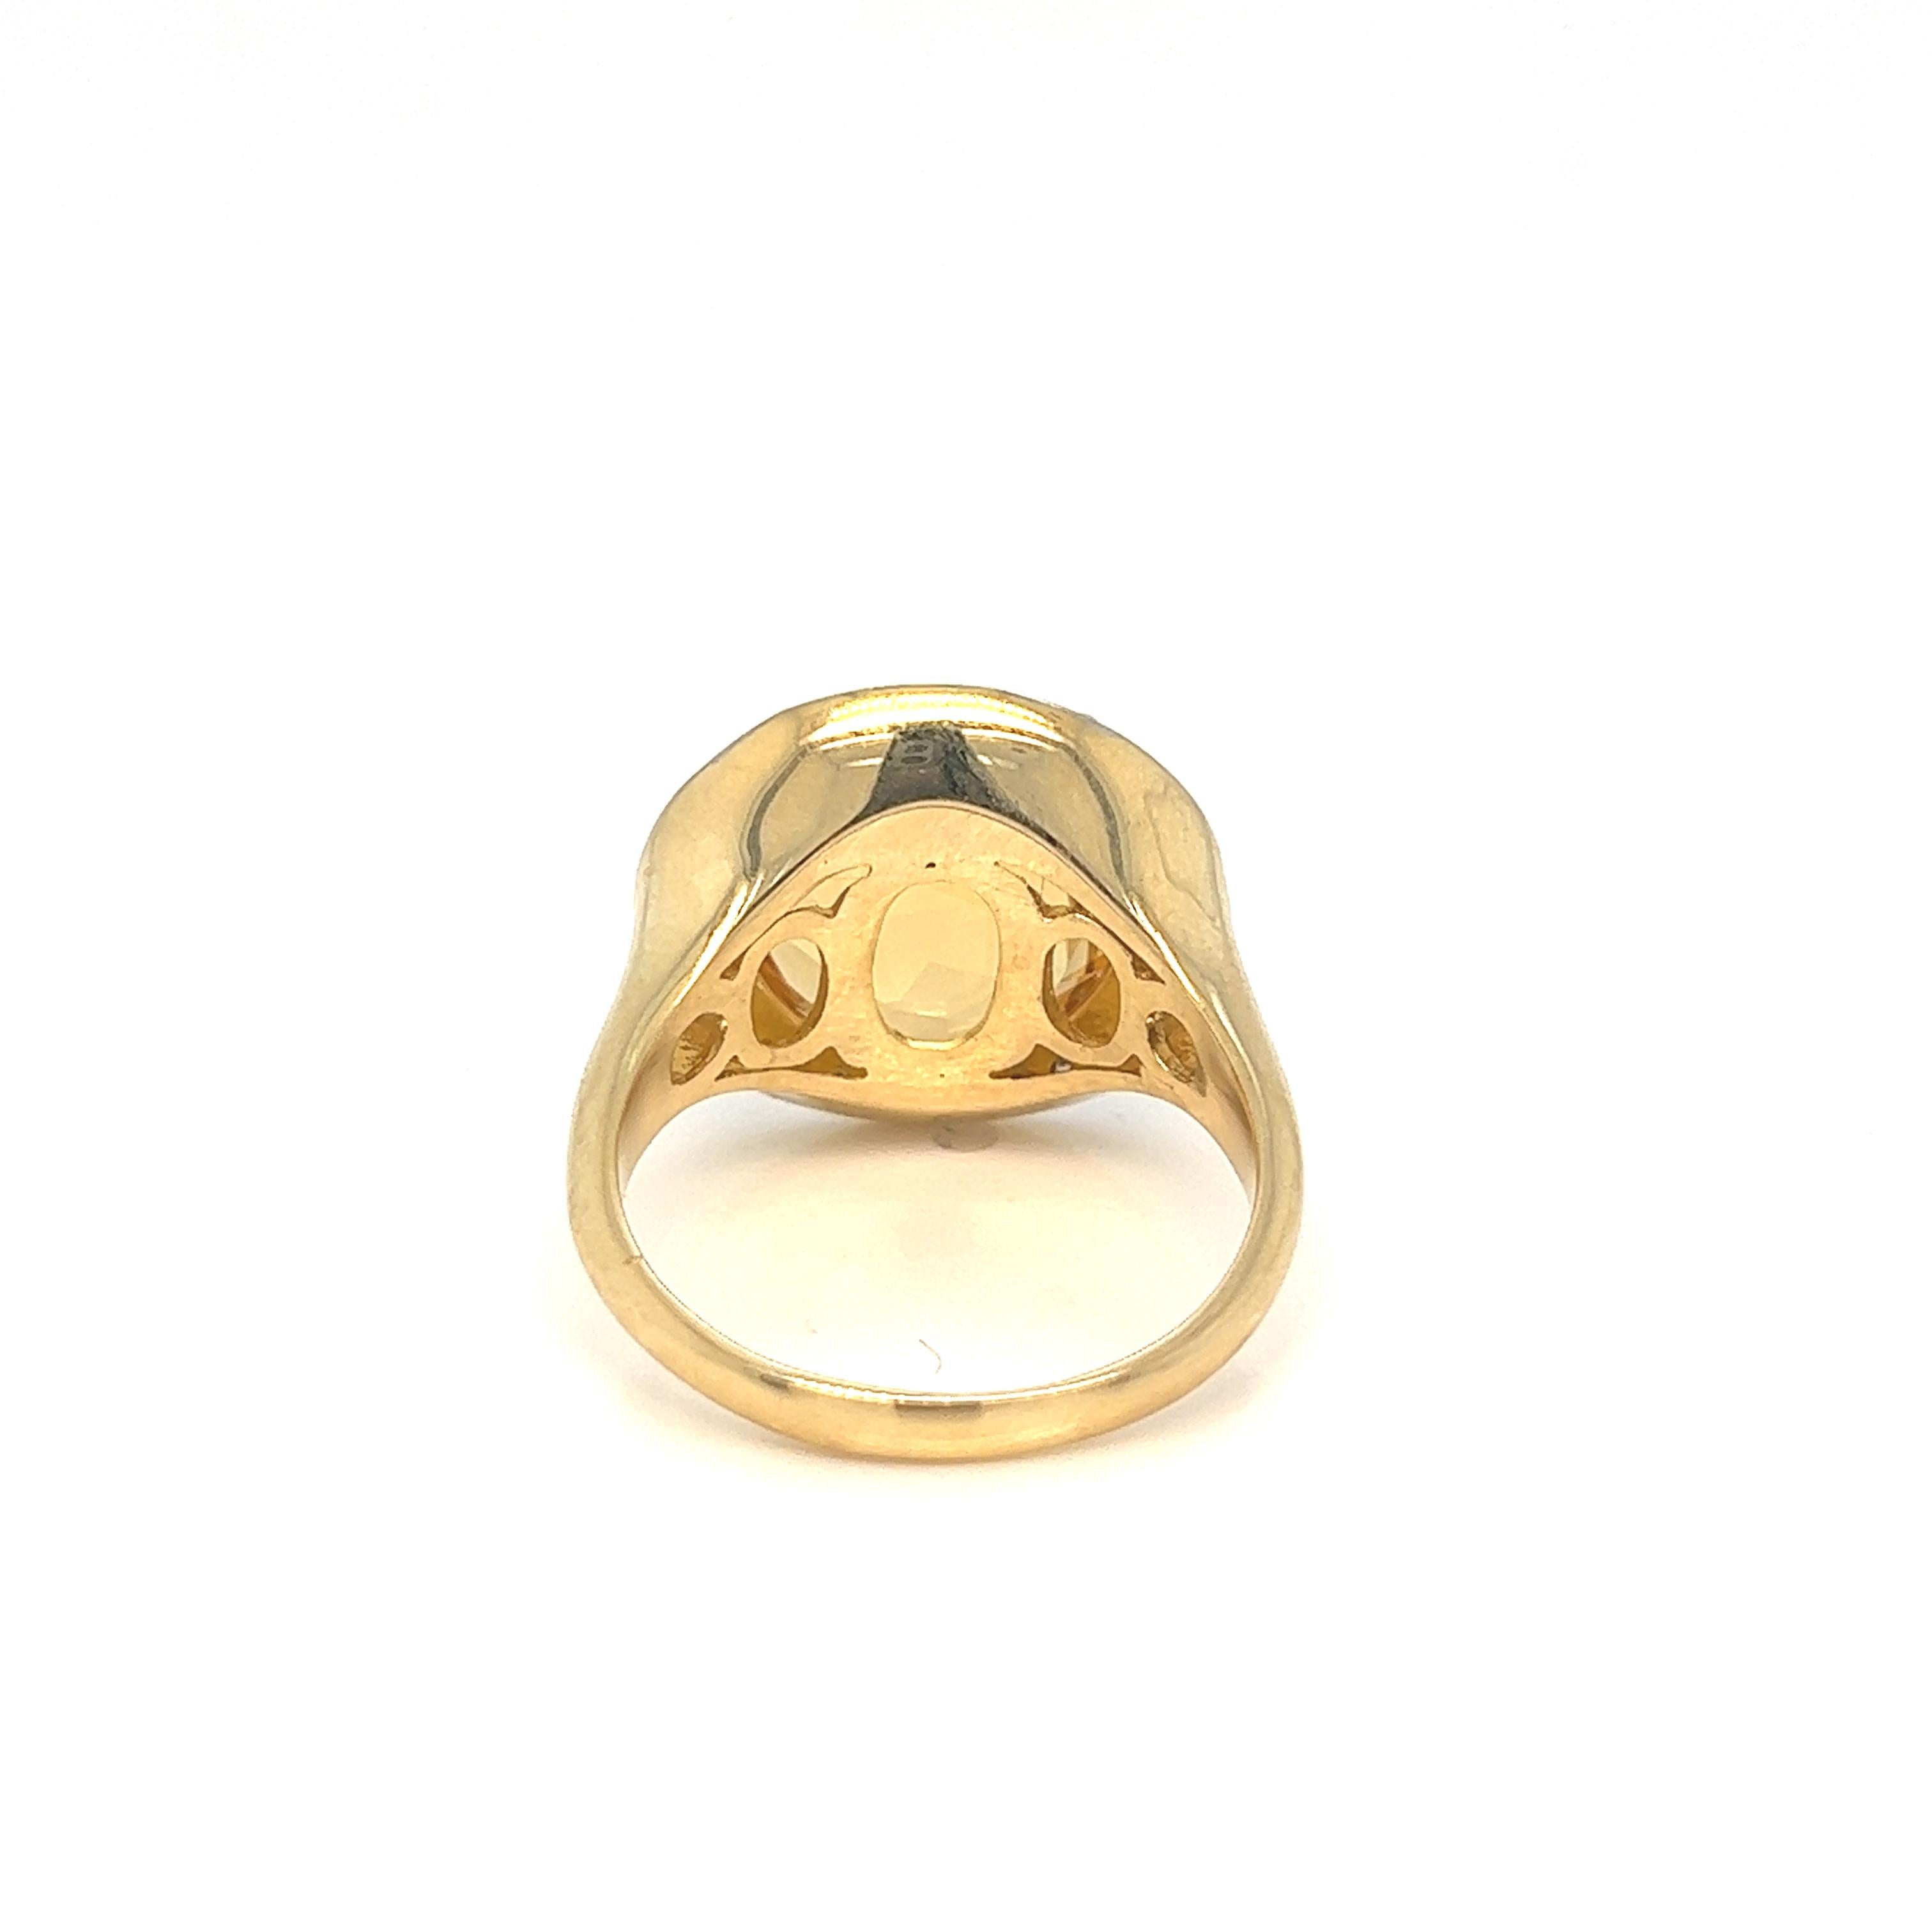 For Sale:  Hand-Crafted 14K Yellow Gold Citrine Color Stone Cocktail Ring 2